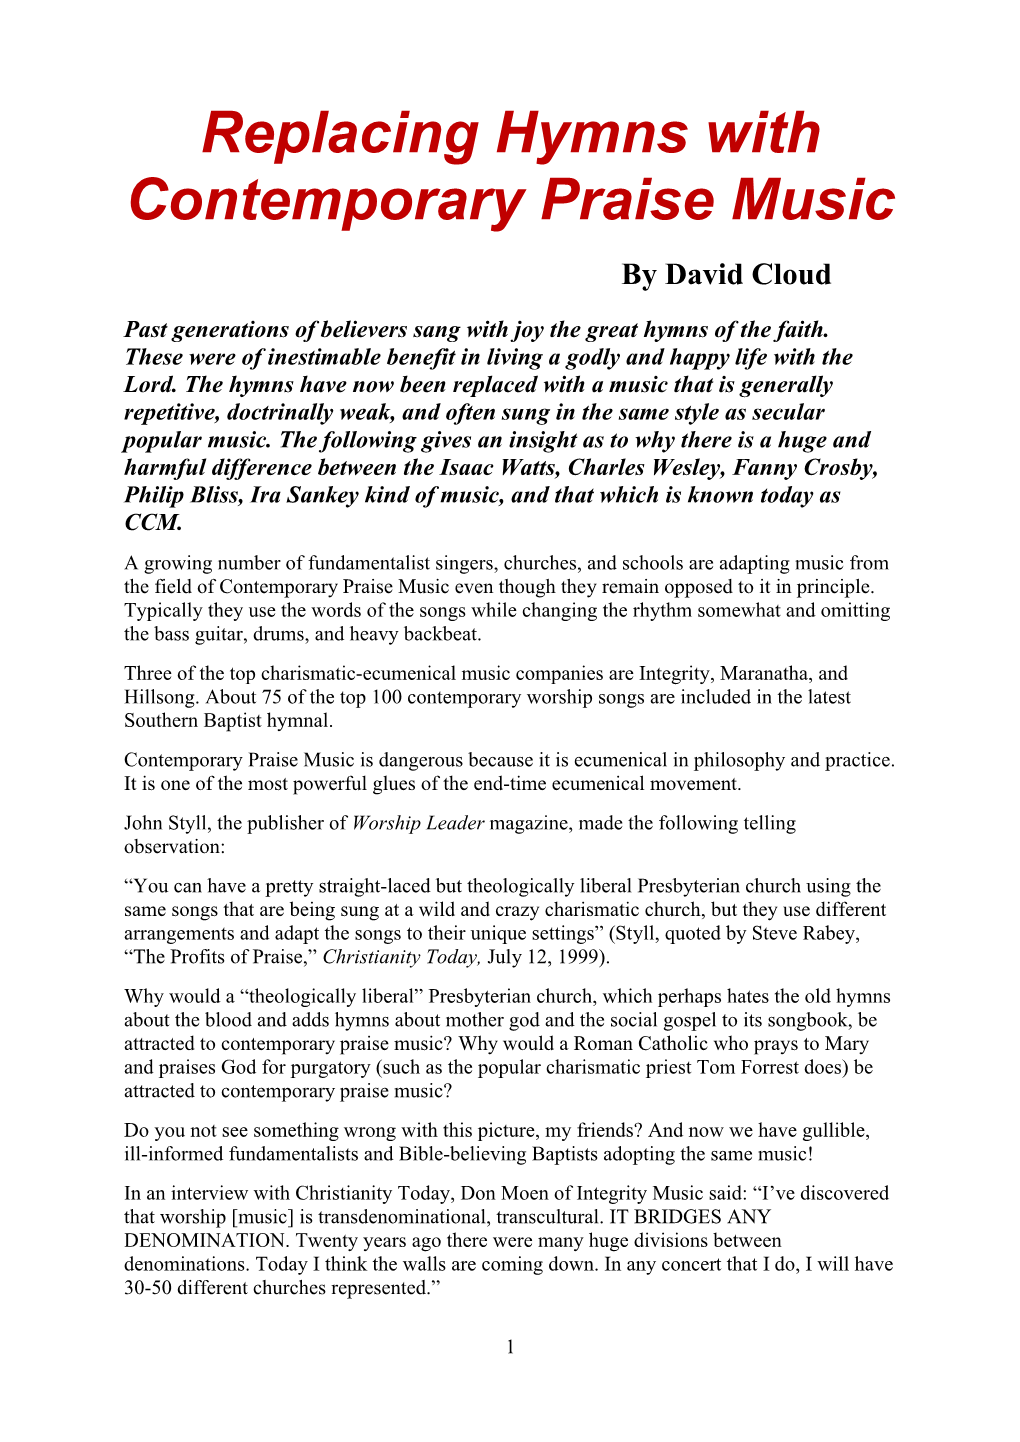 Replacing Hymns with Contemporary Praise Music by David Cloud